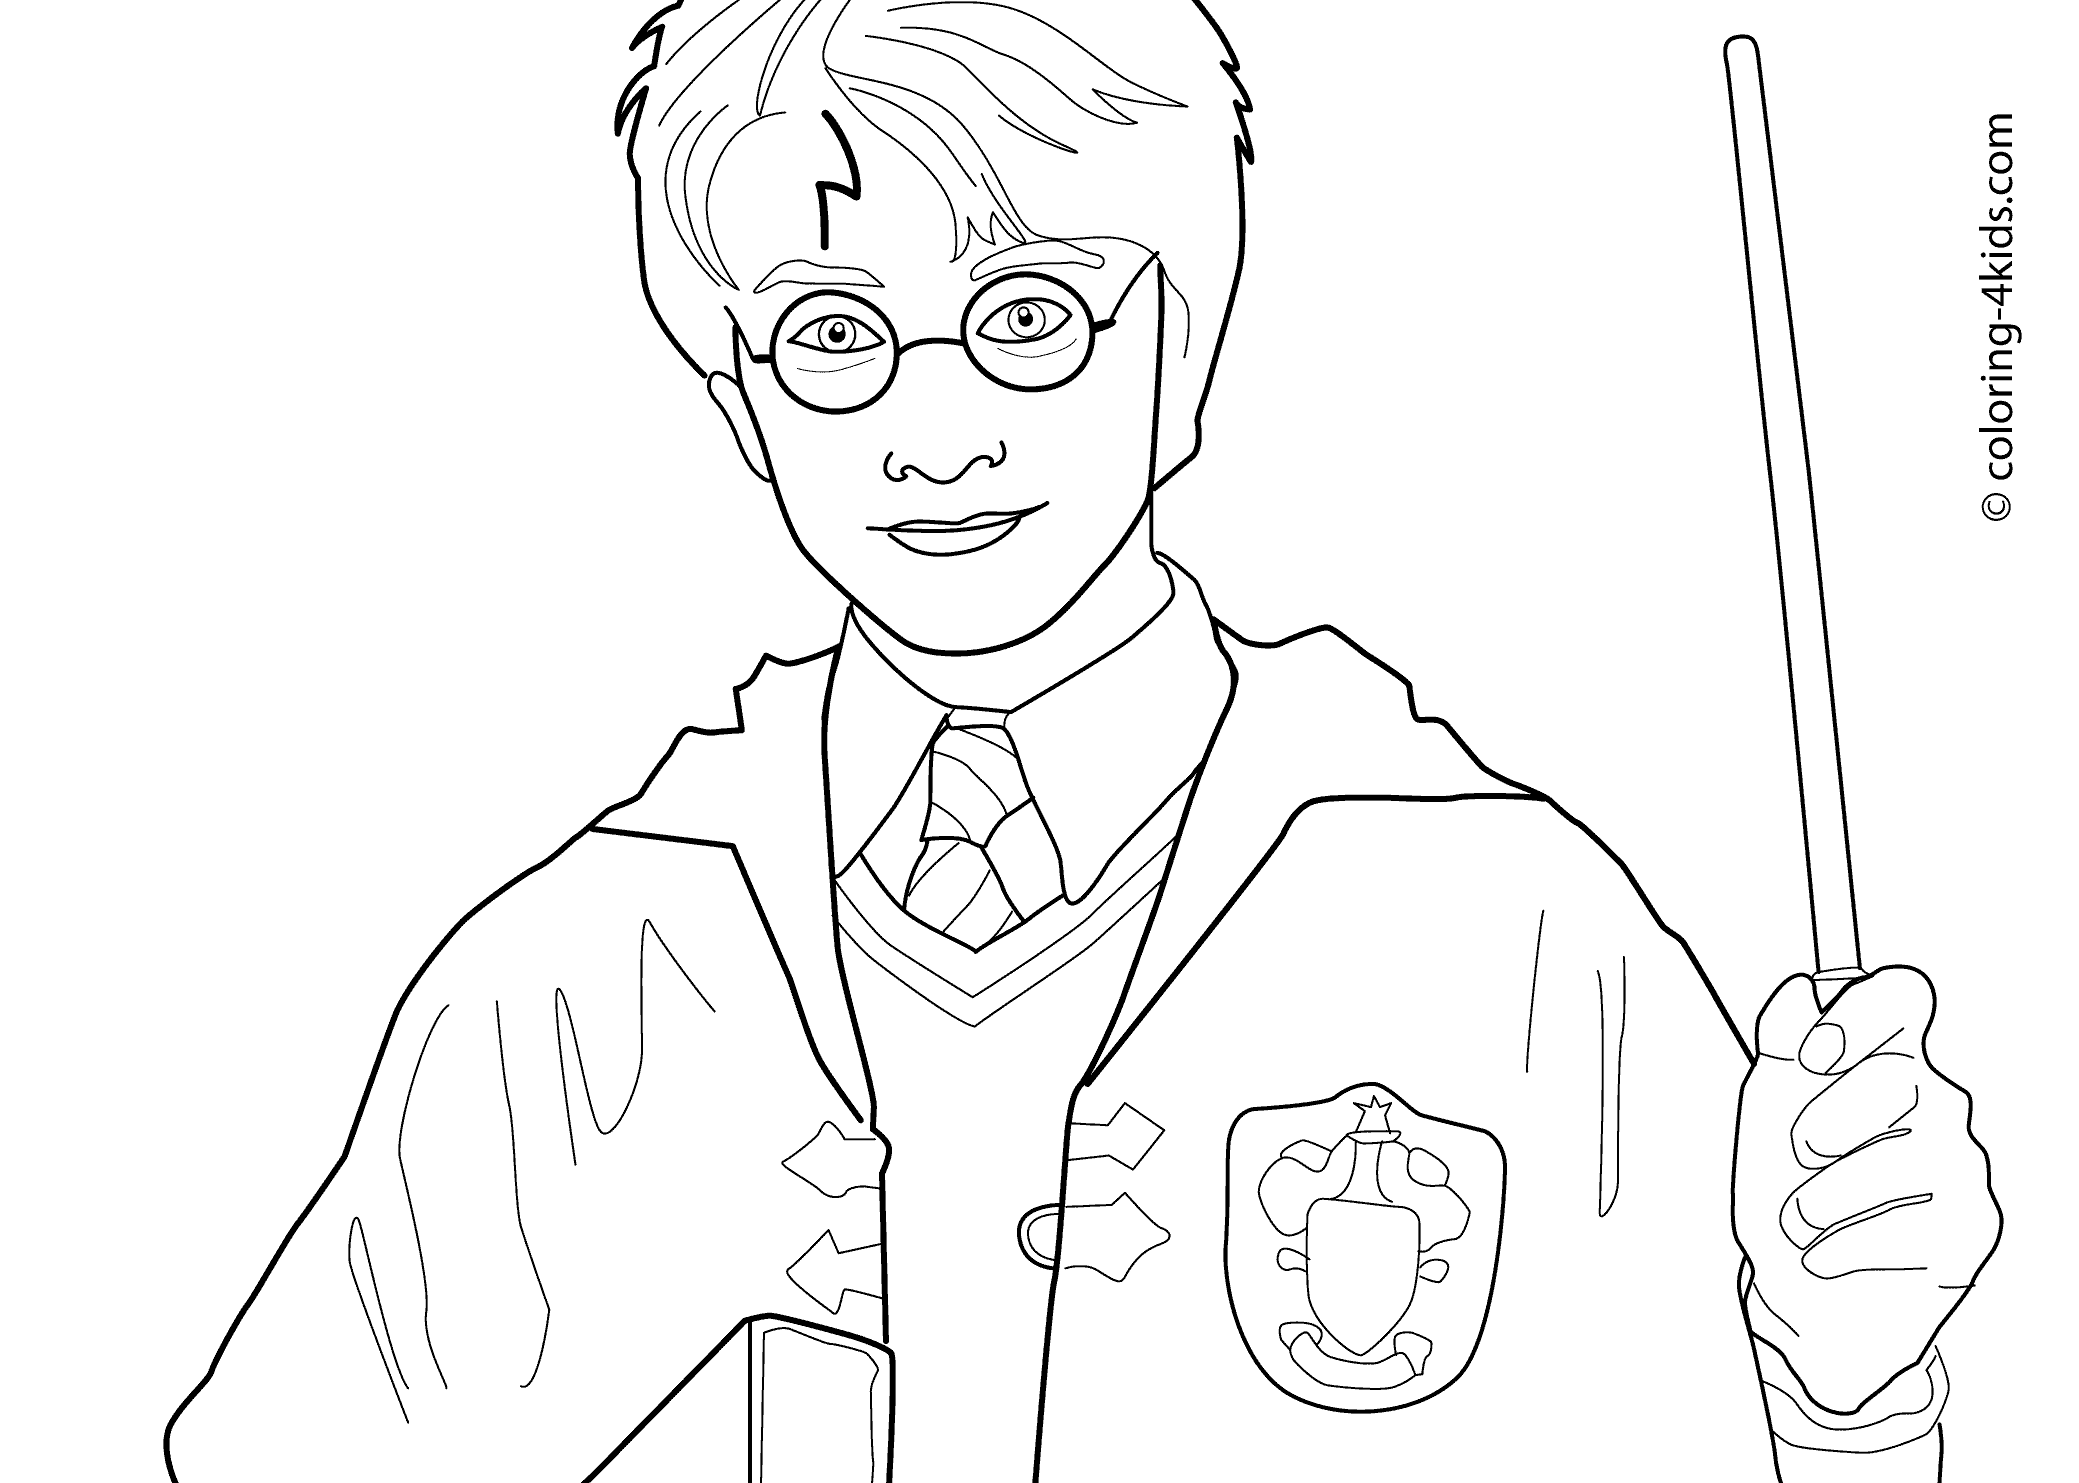 Harry Potter Coloring Pages (19 Pictures) - Colorine.net | 15493